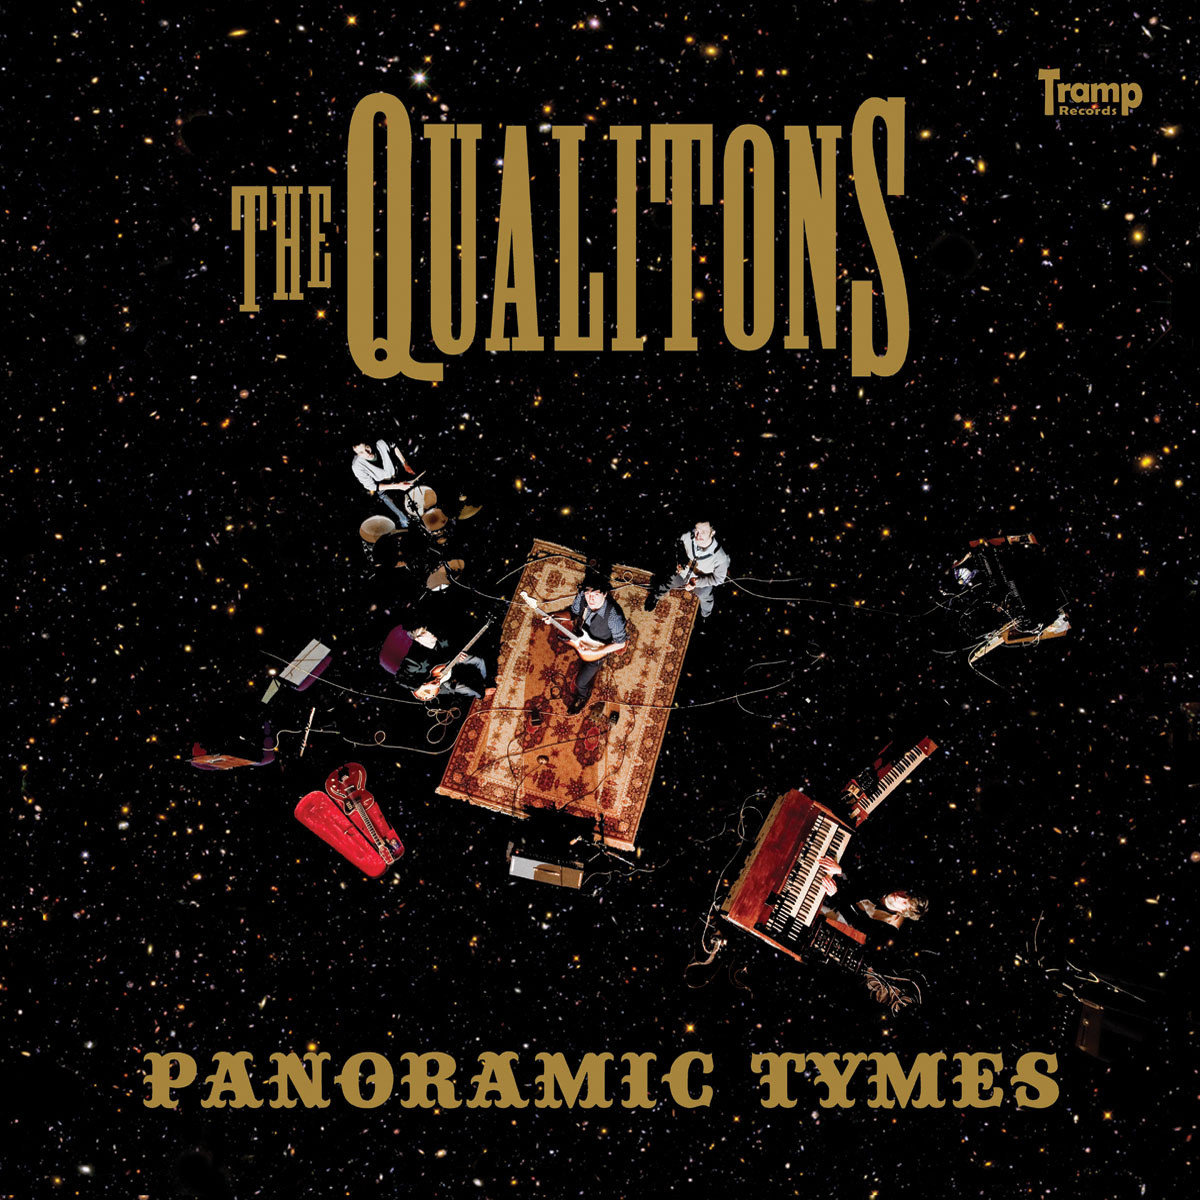 The Qualitons – Panoramic Tymes (2010) [Bandcamp FLAC 24bit/48kHz]